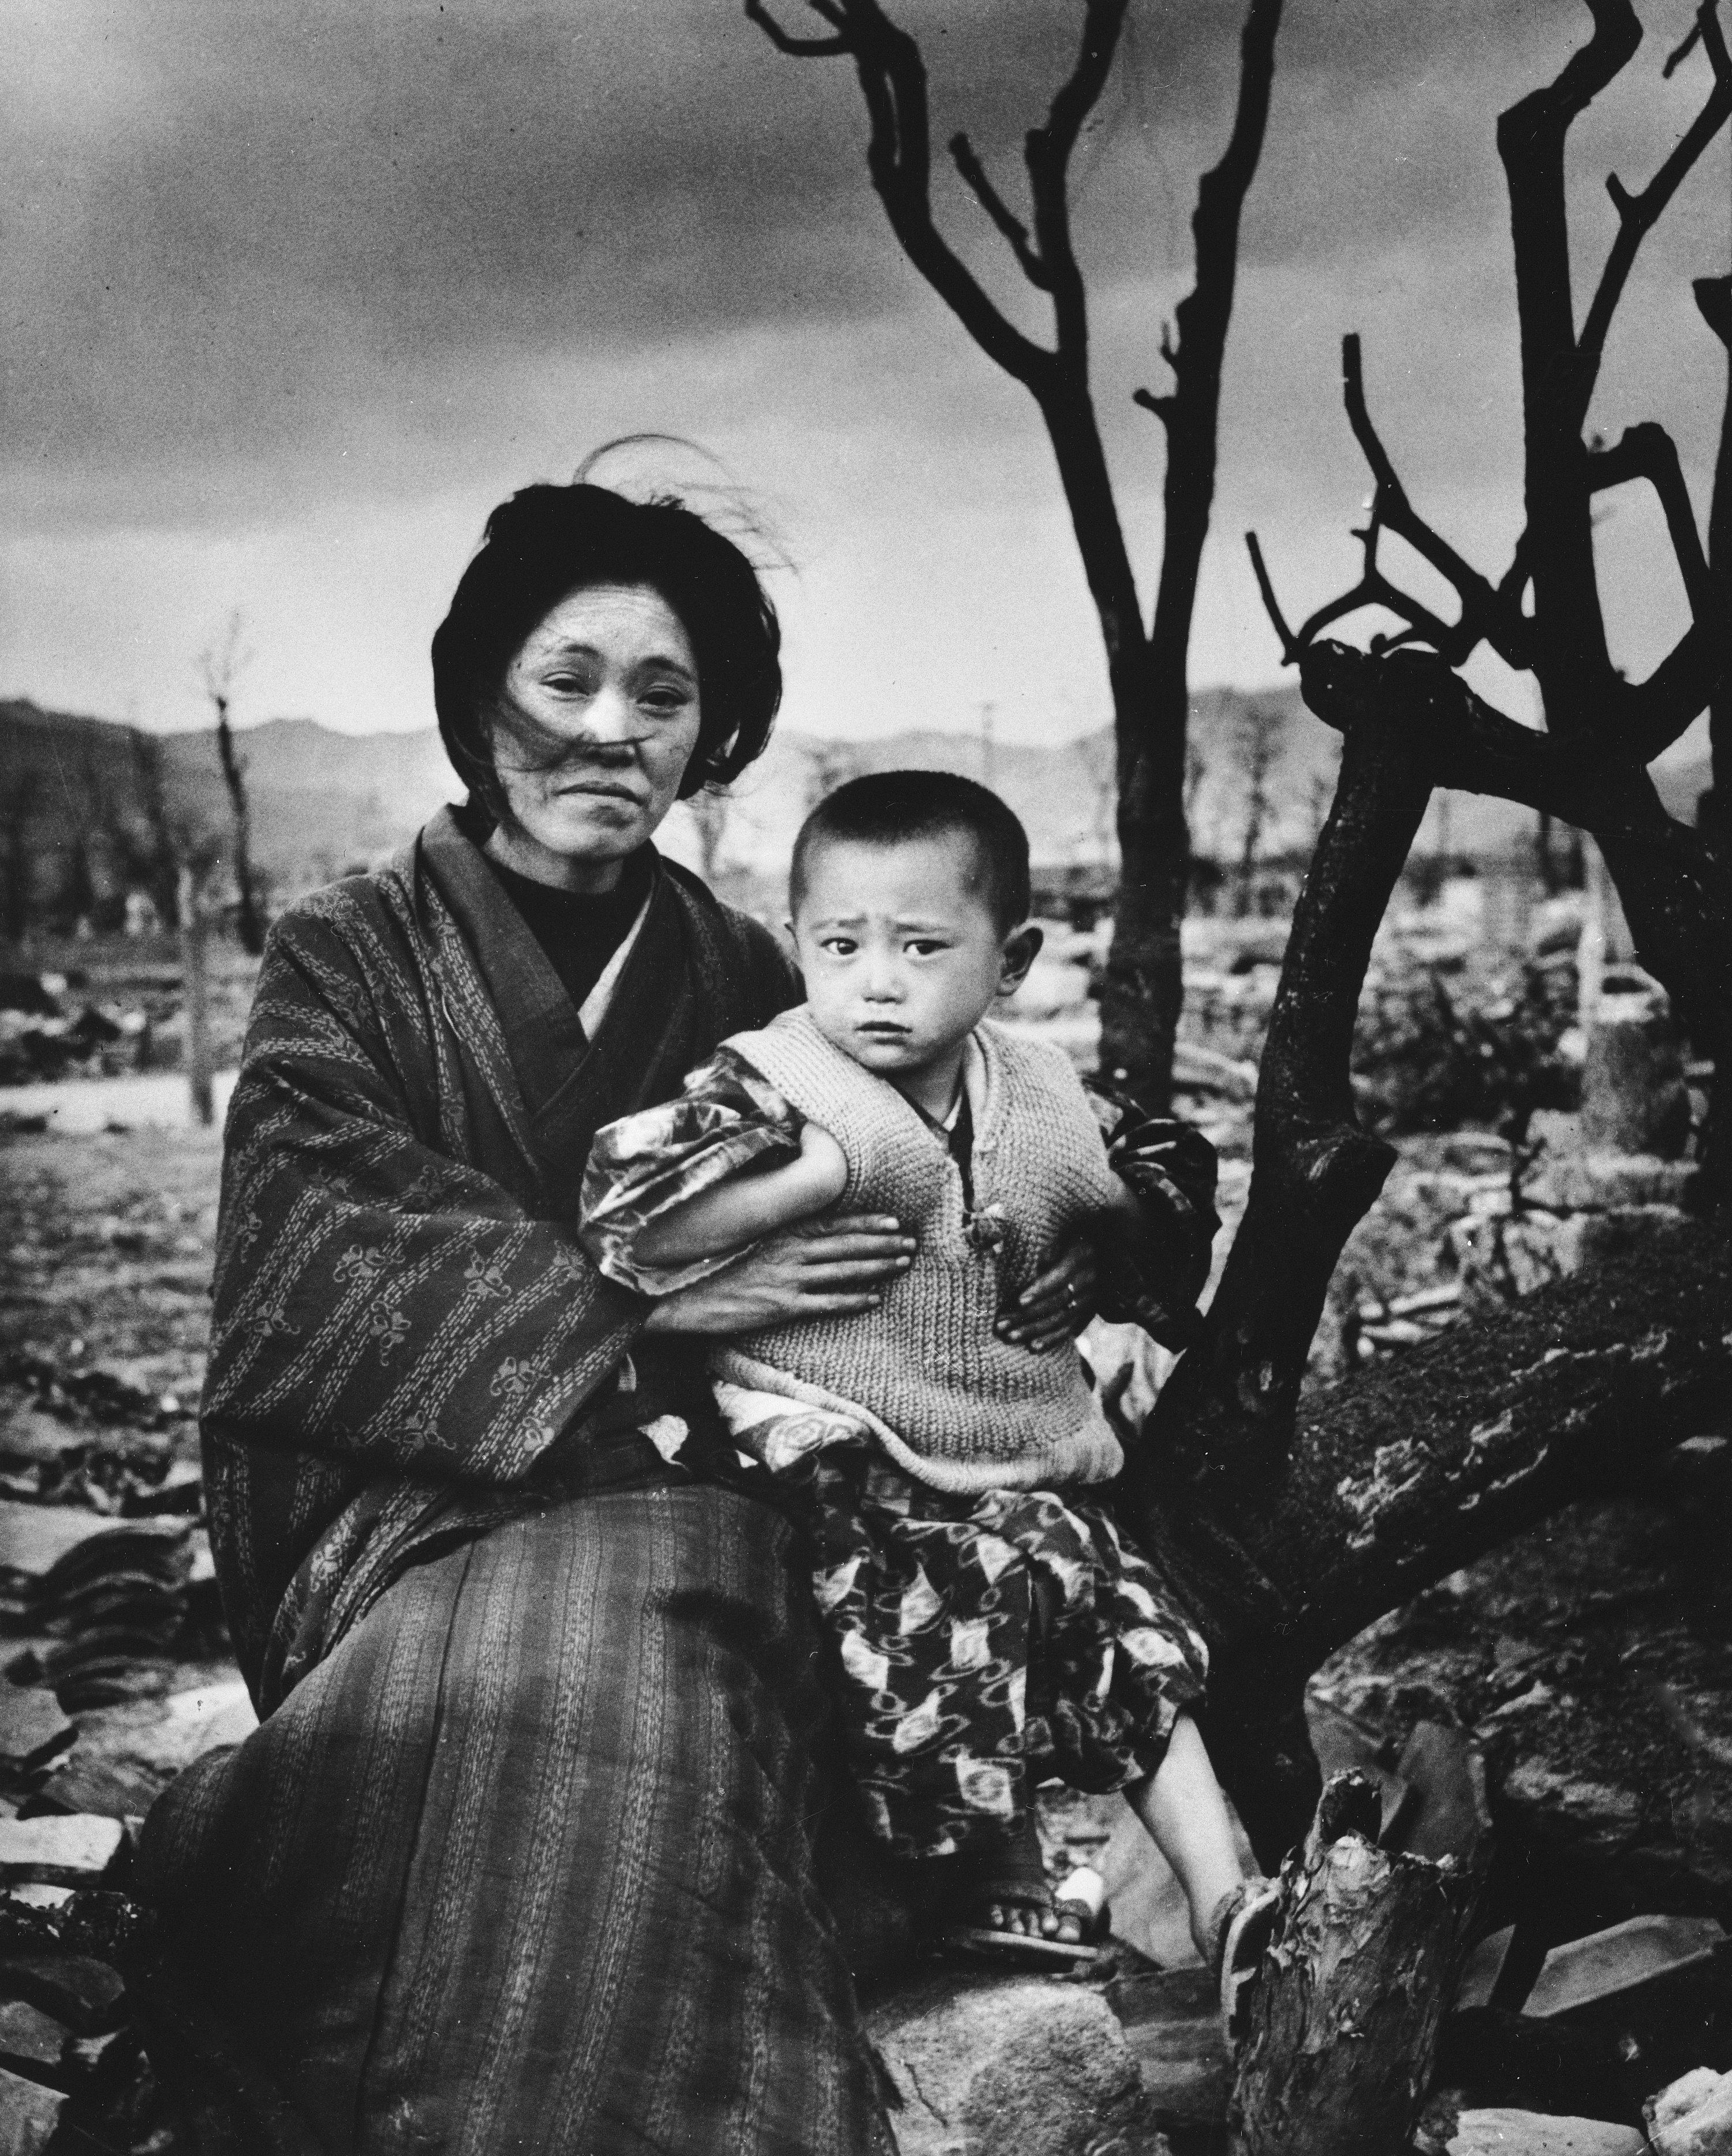 Mother and child in Hiroshima, Japan, December 1945.